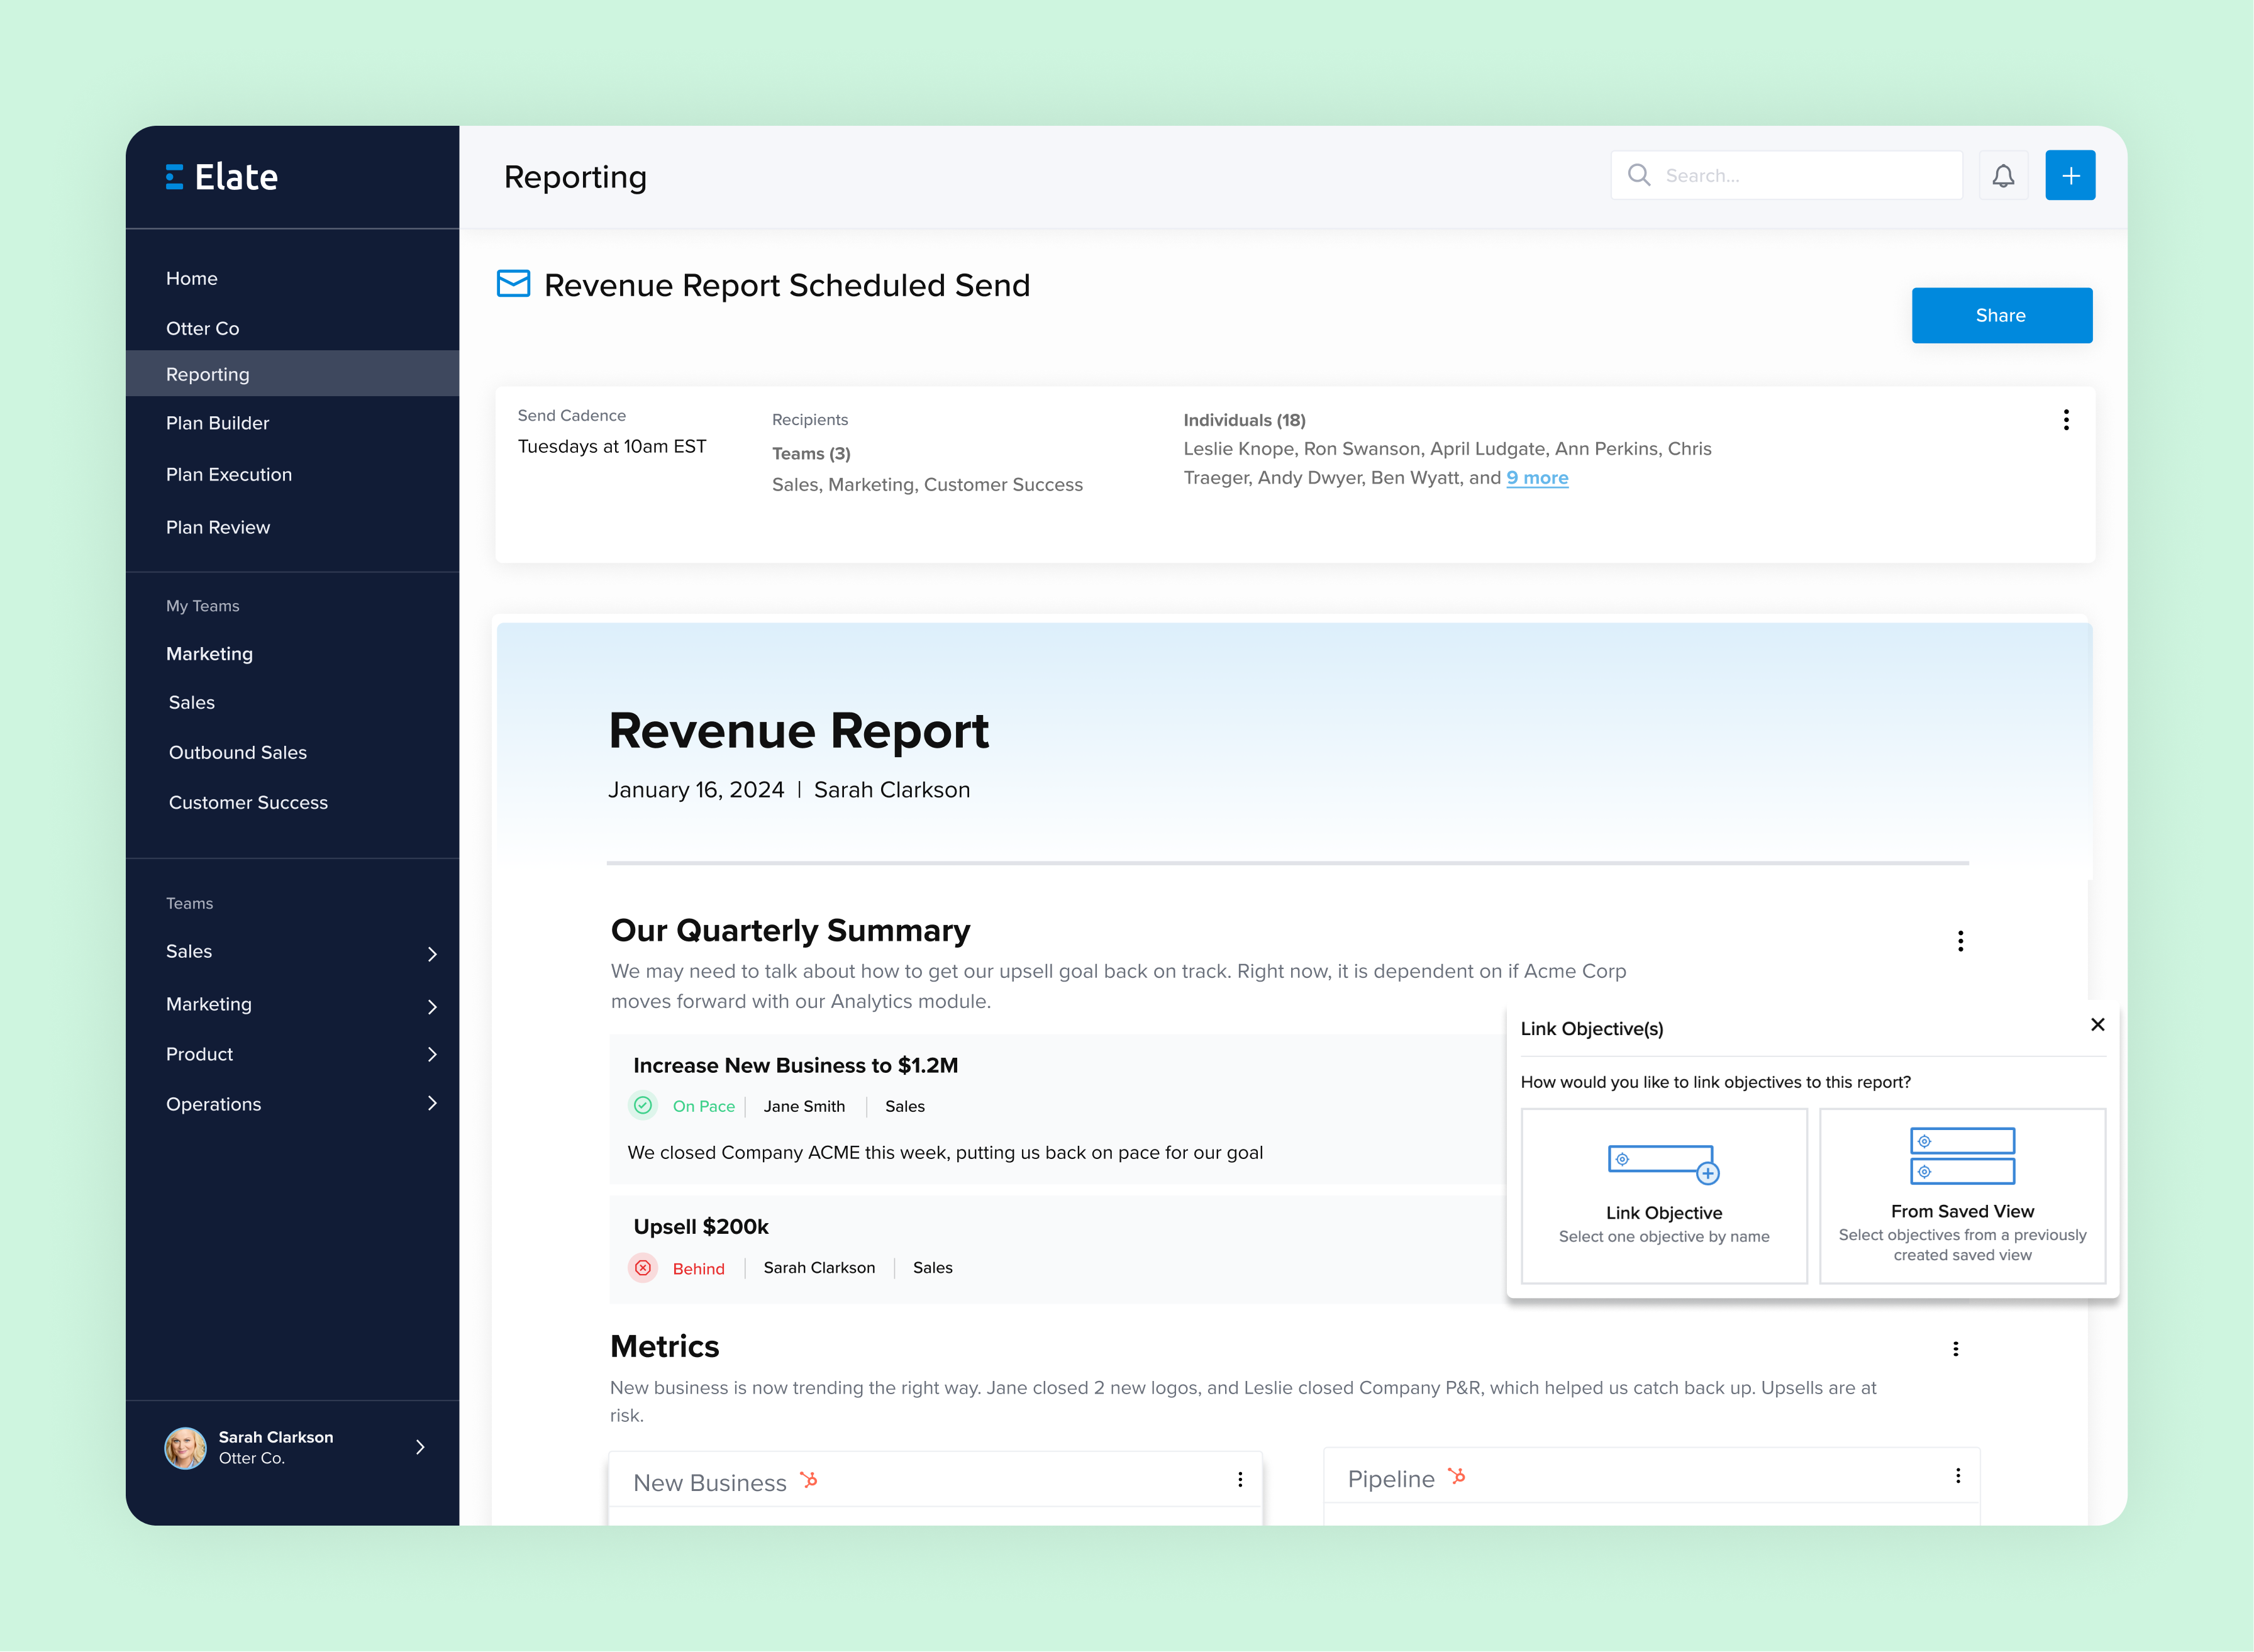 Advanced Reporting is the first of it's kind. Connect your Objectives to pull real-time information on your strategy. Schedule your sends. Great for Leadership and CEO rollups. Shifts the focus fro "what's been done" to "what are we going to do about it".